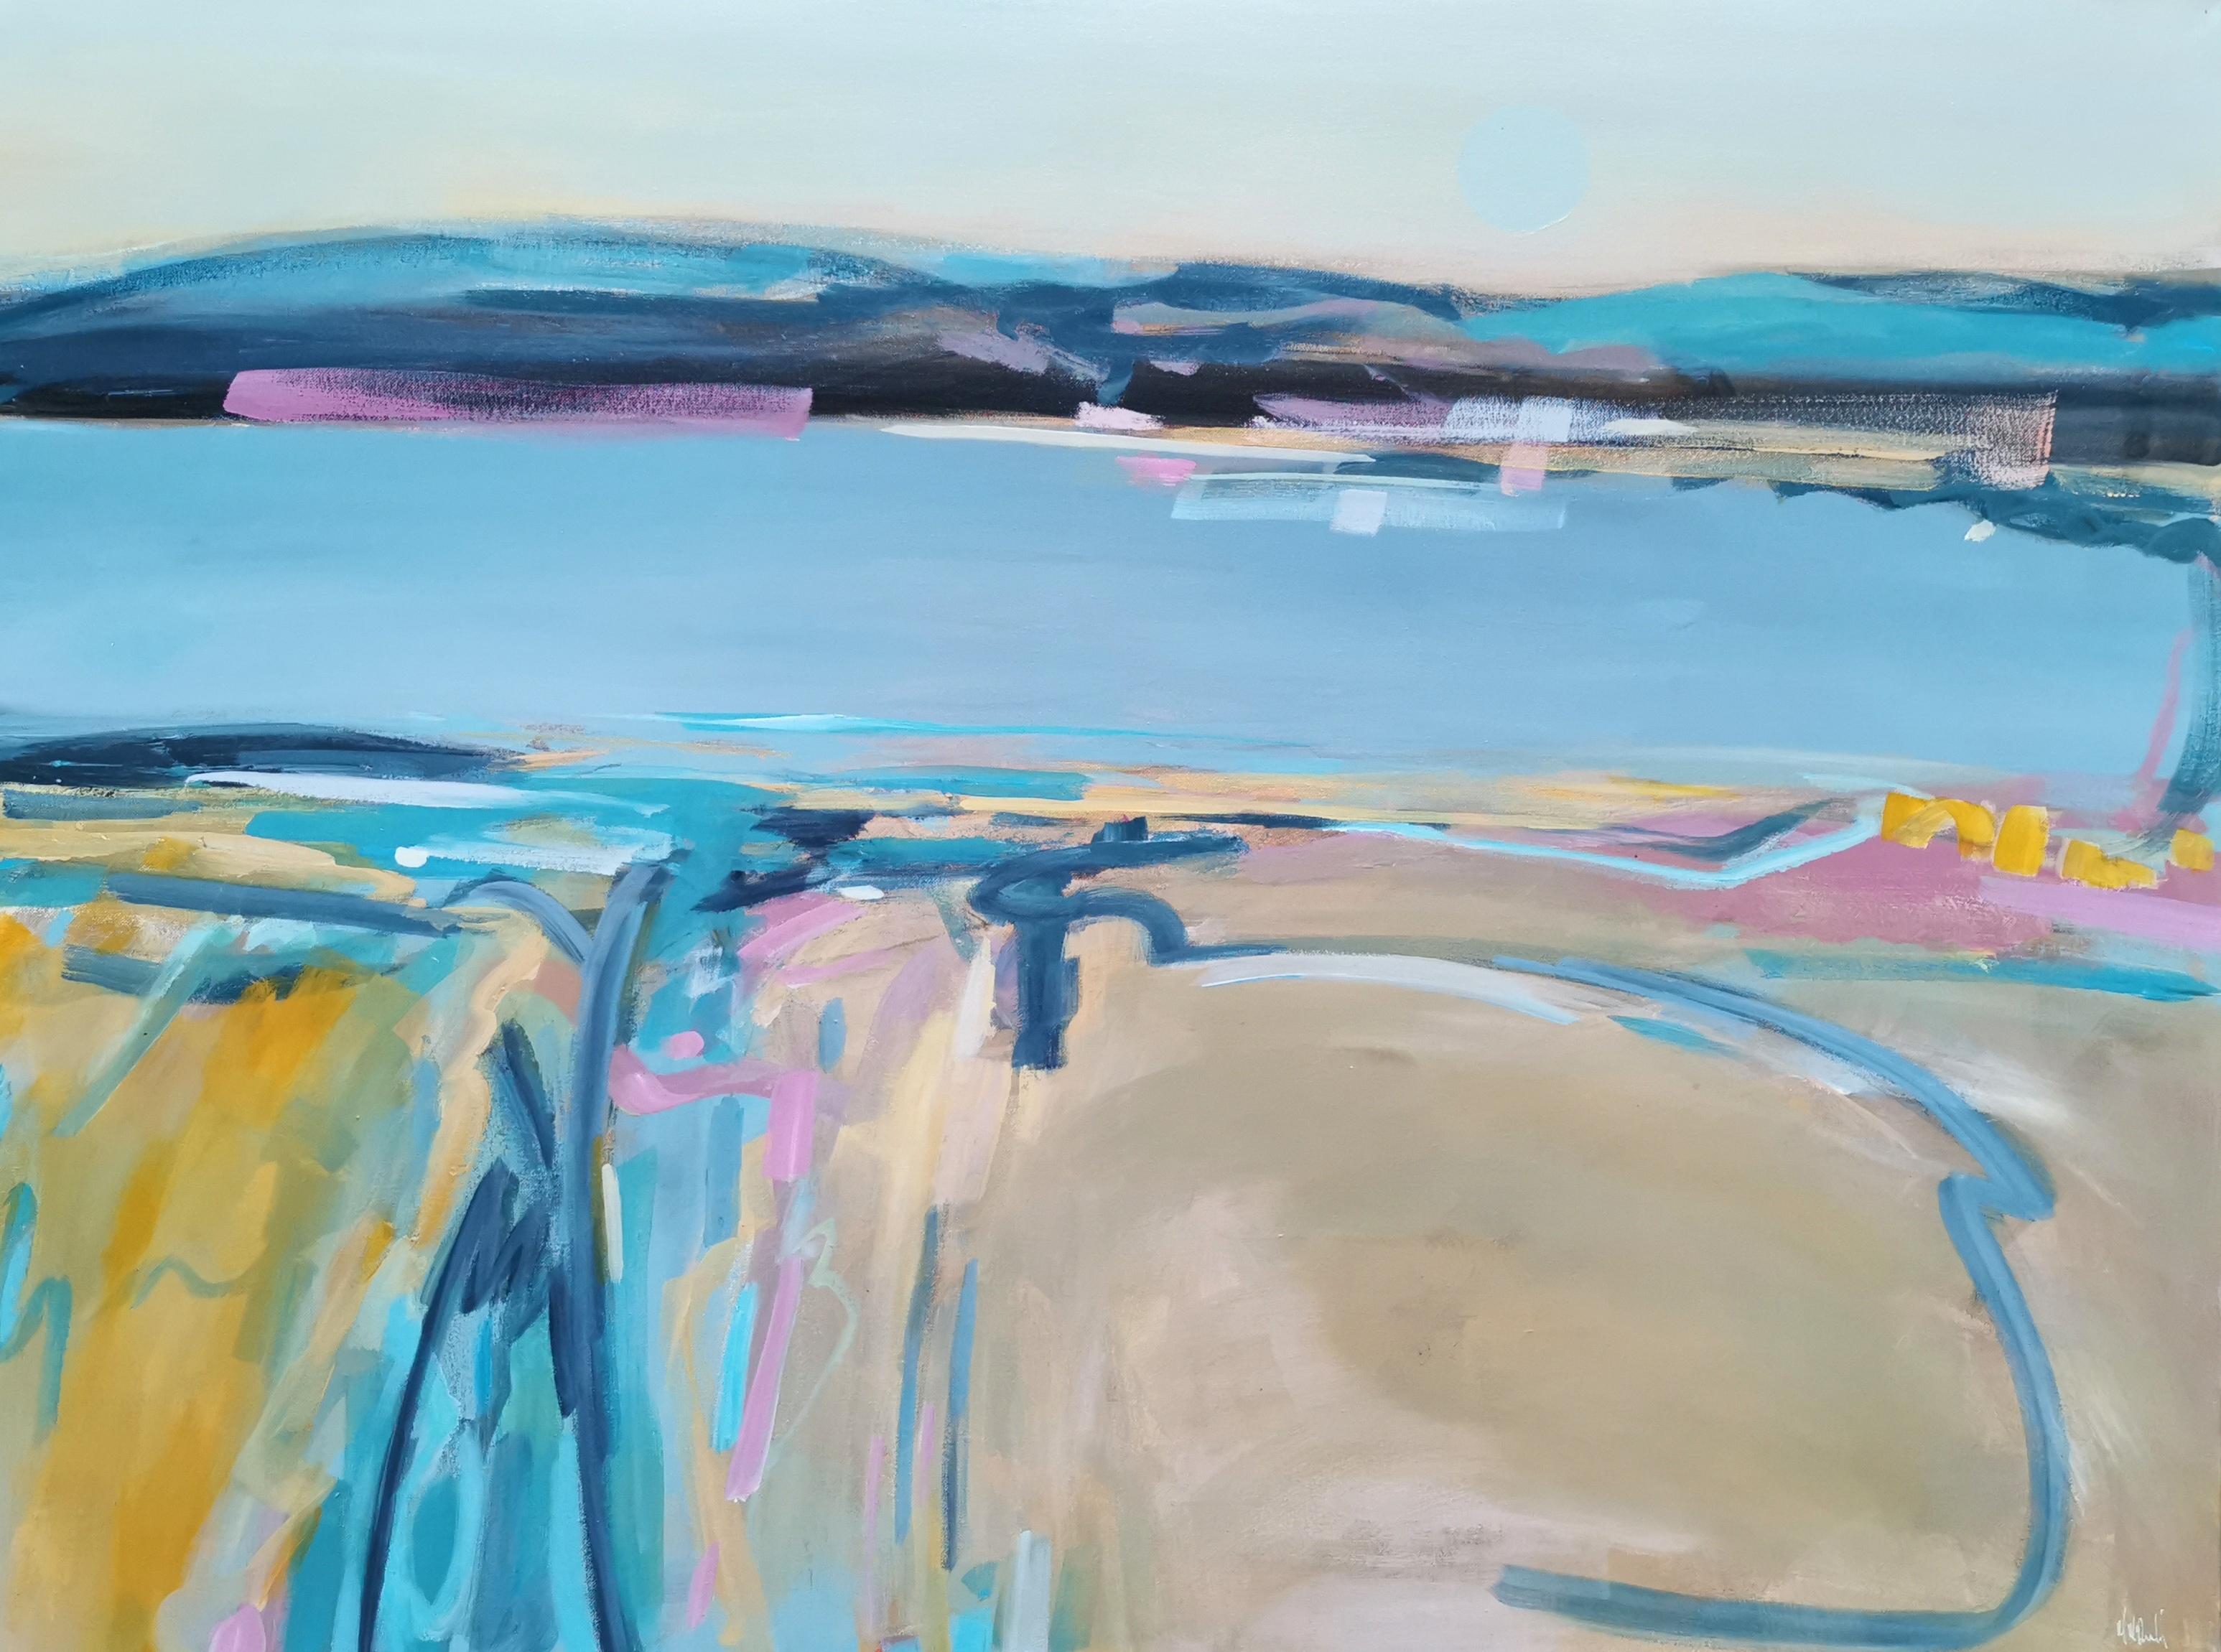 Evening light over the loch and a gentle glow from the moon encouraging pathways to be followed by eye over the hillside, shoreline and loch. The movement of soft light journeying and creating pattern.

Additional information:
Acrylic, Canvas on